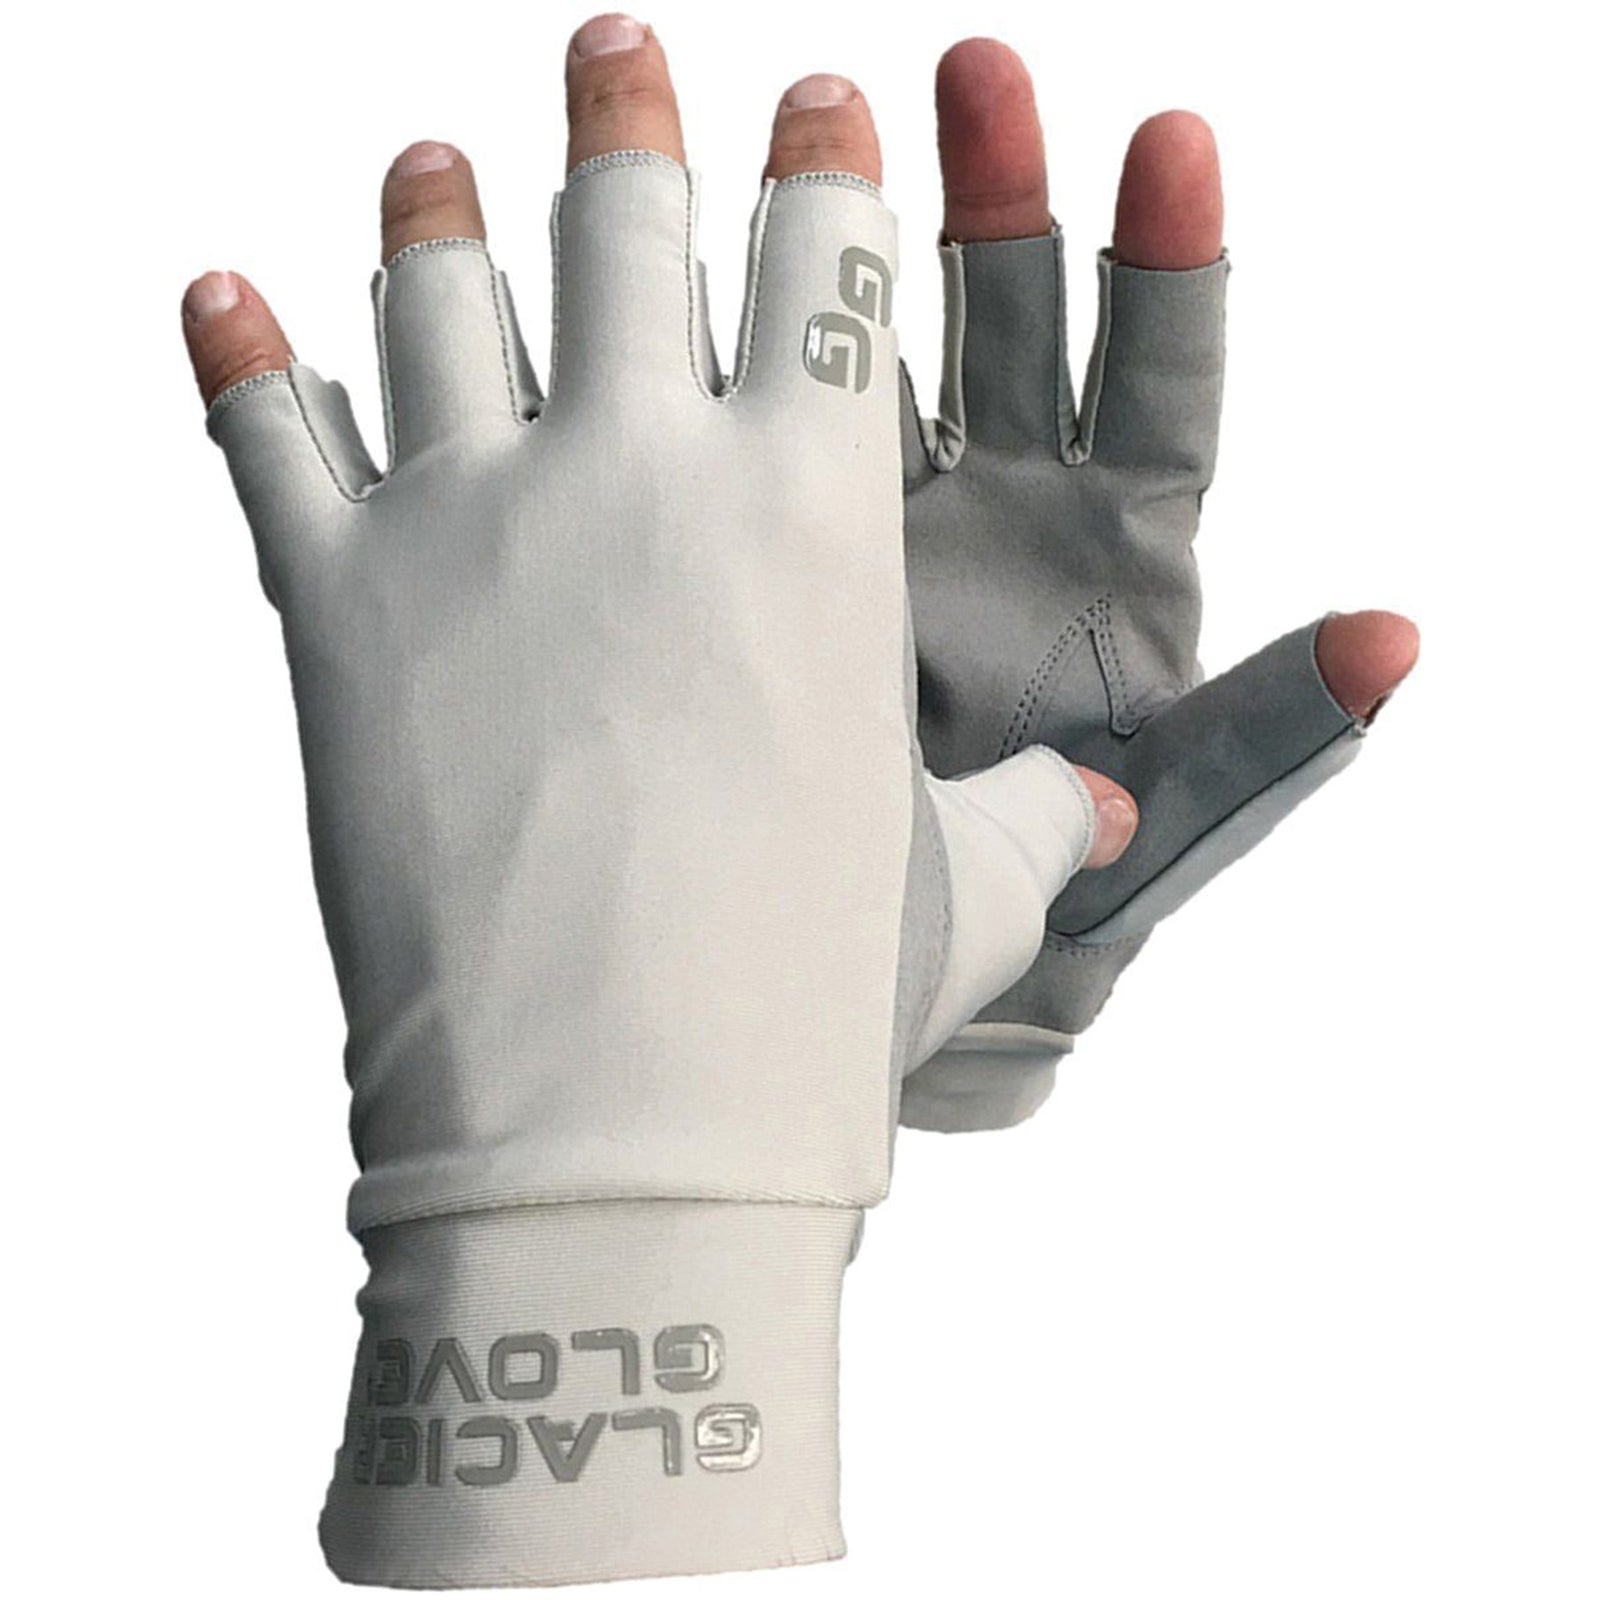 Patagonia Technical Sun Gloves